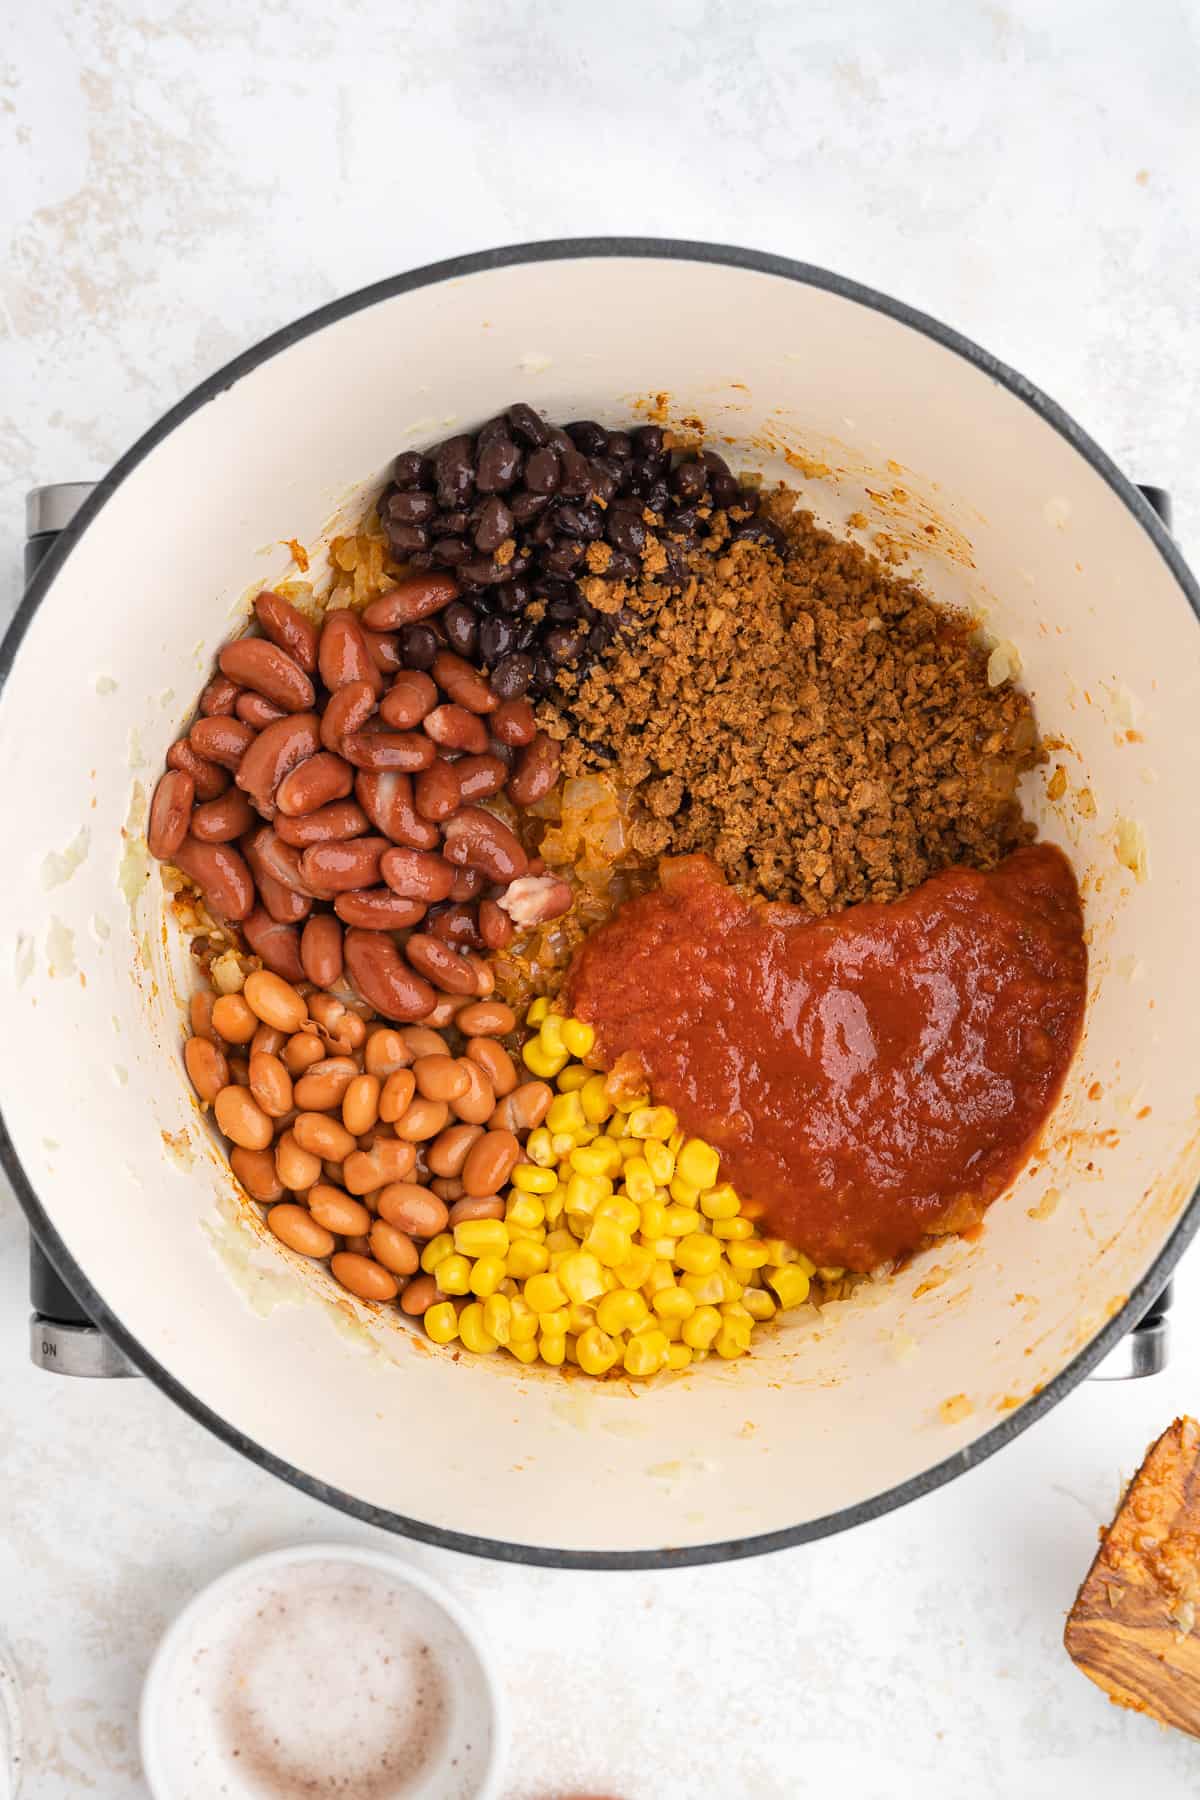 all vegan chili ingredients in a pot, unmixed